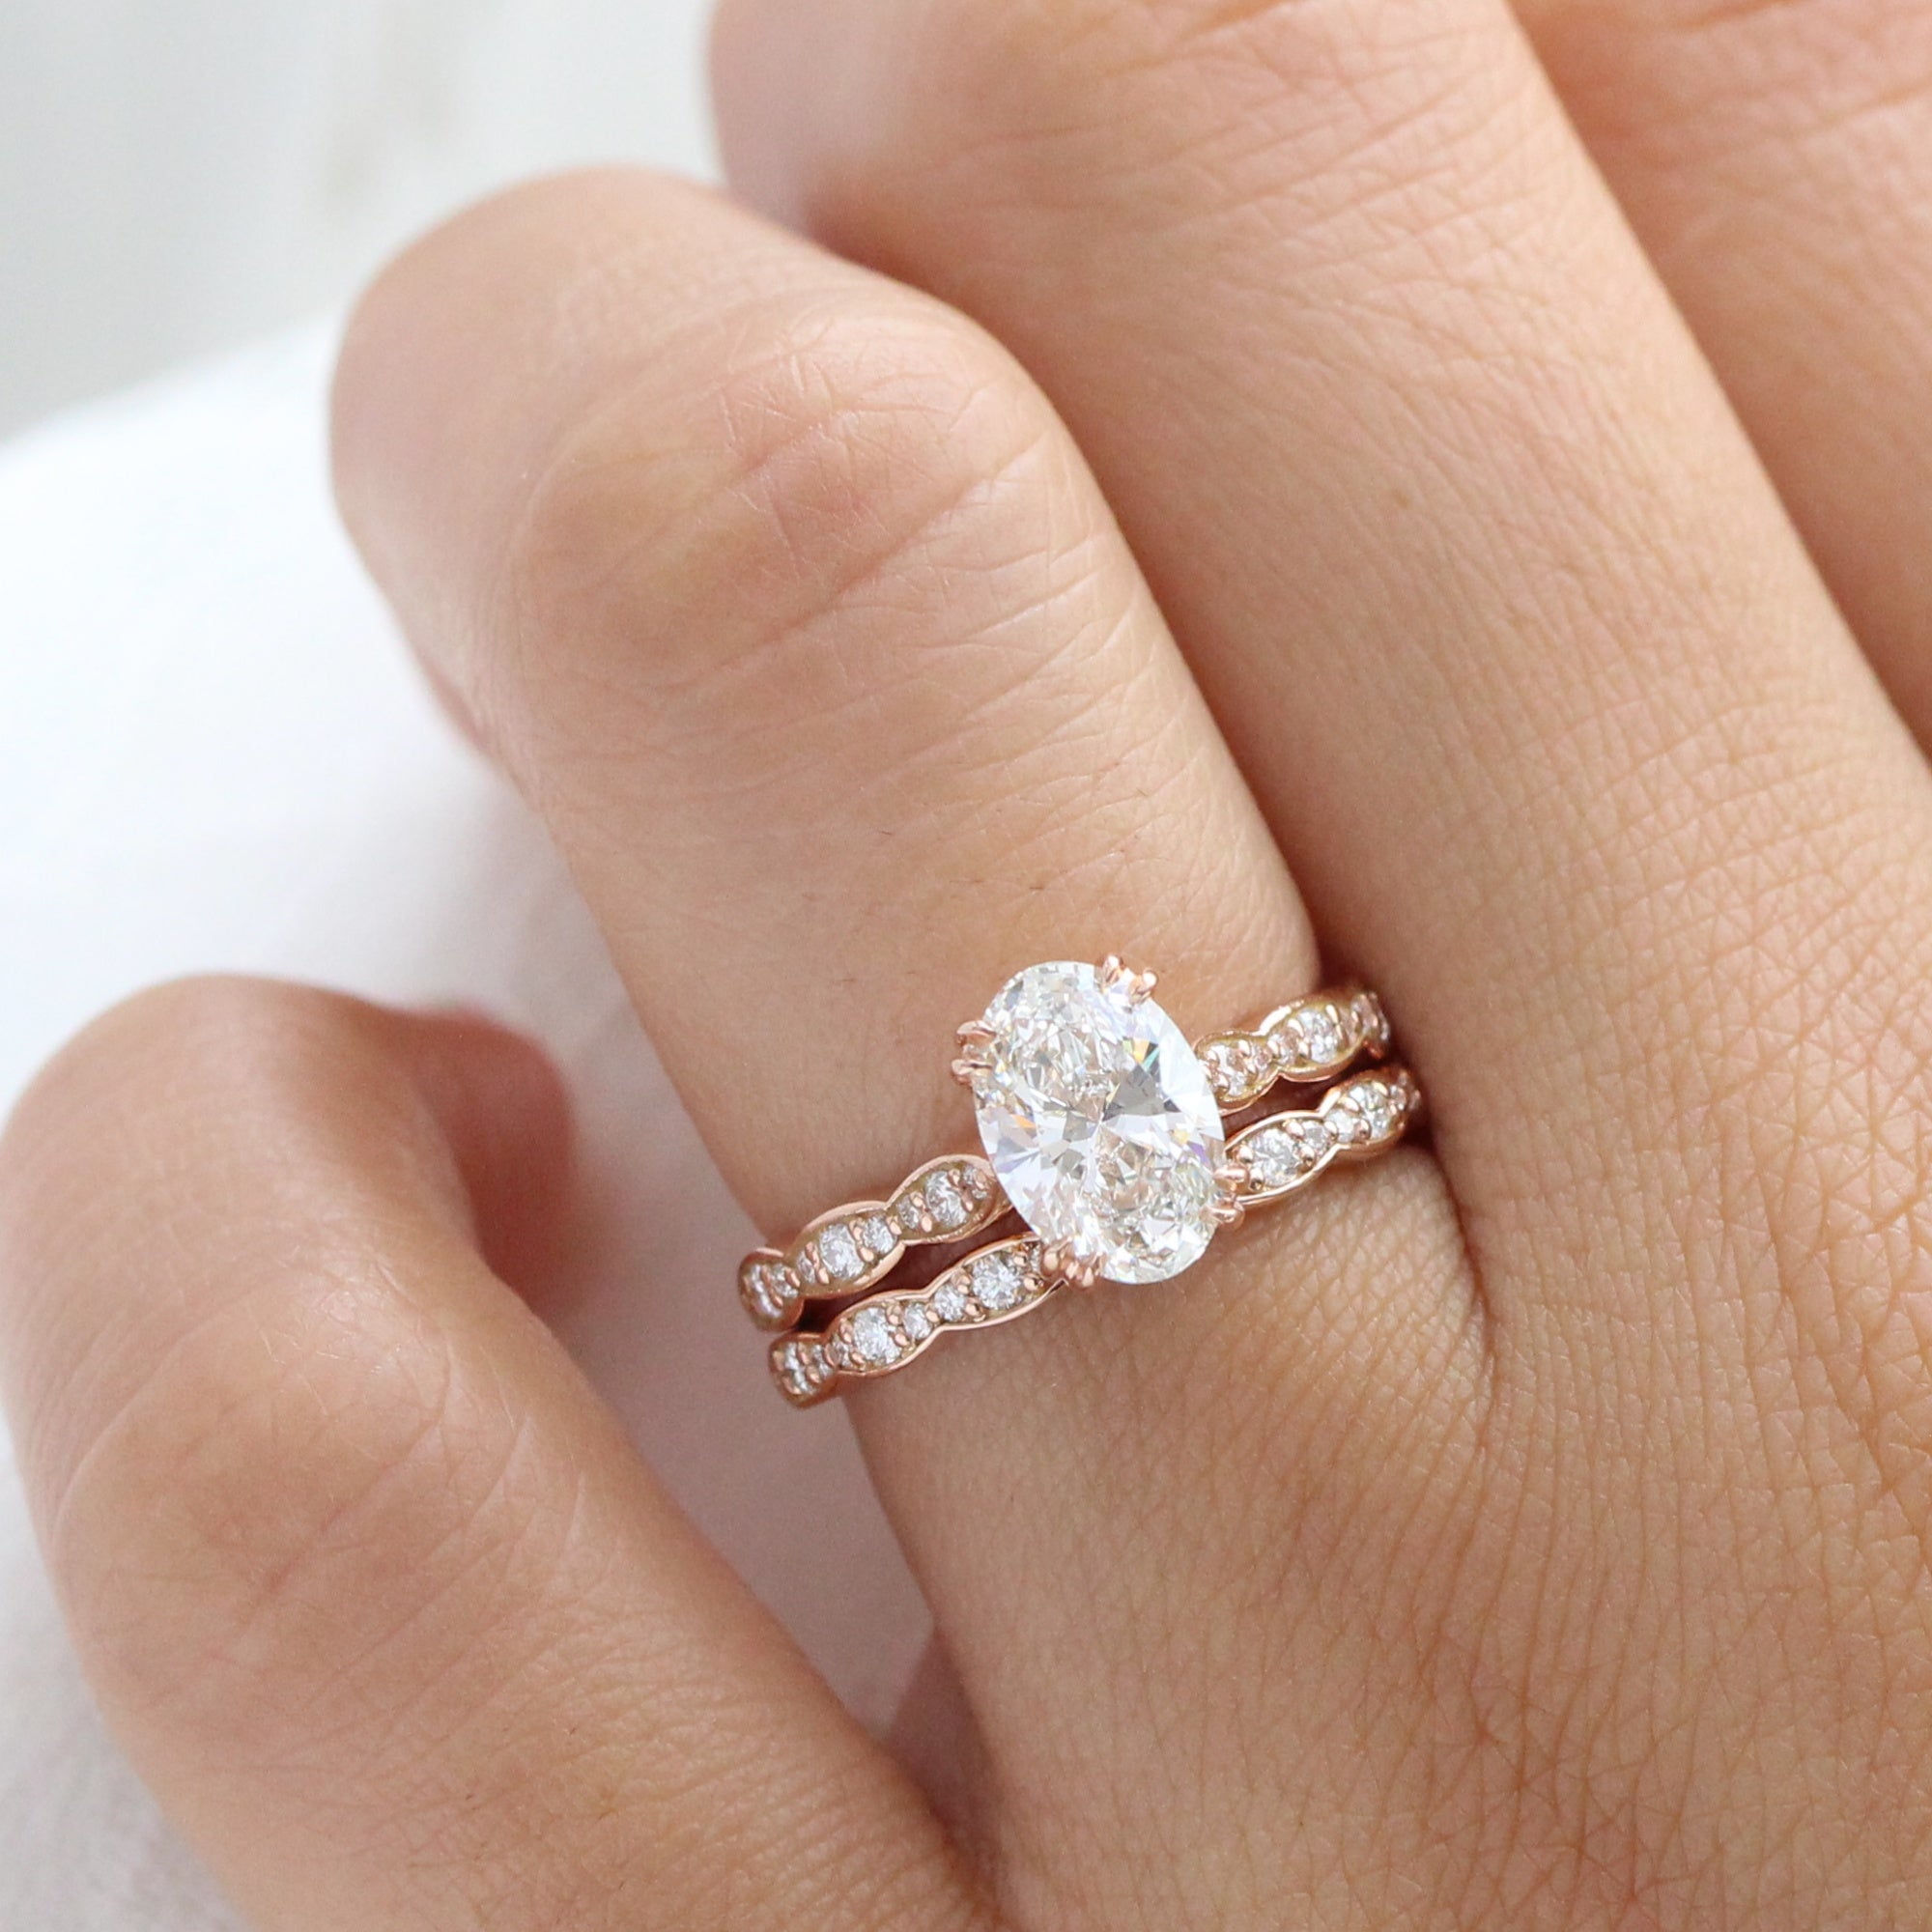 Large Oval Lab Diamond Ring Bridal Set Rose Gold Solitaire Ring Stack